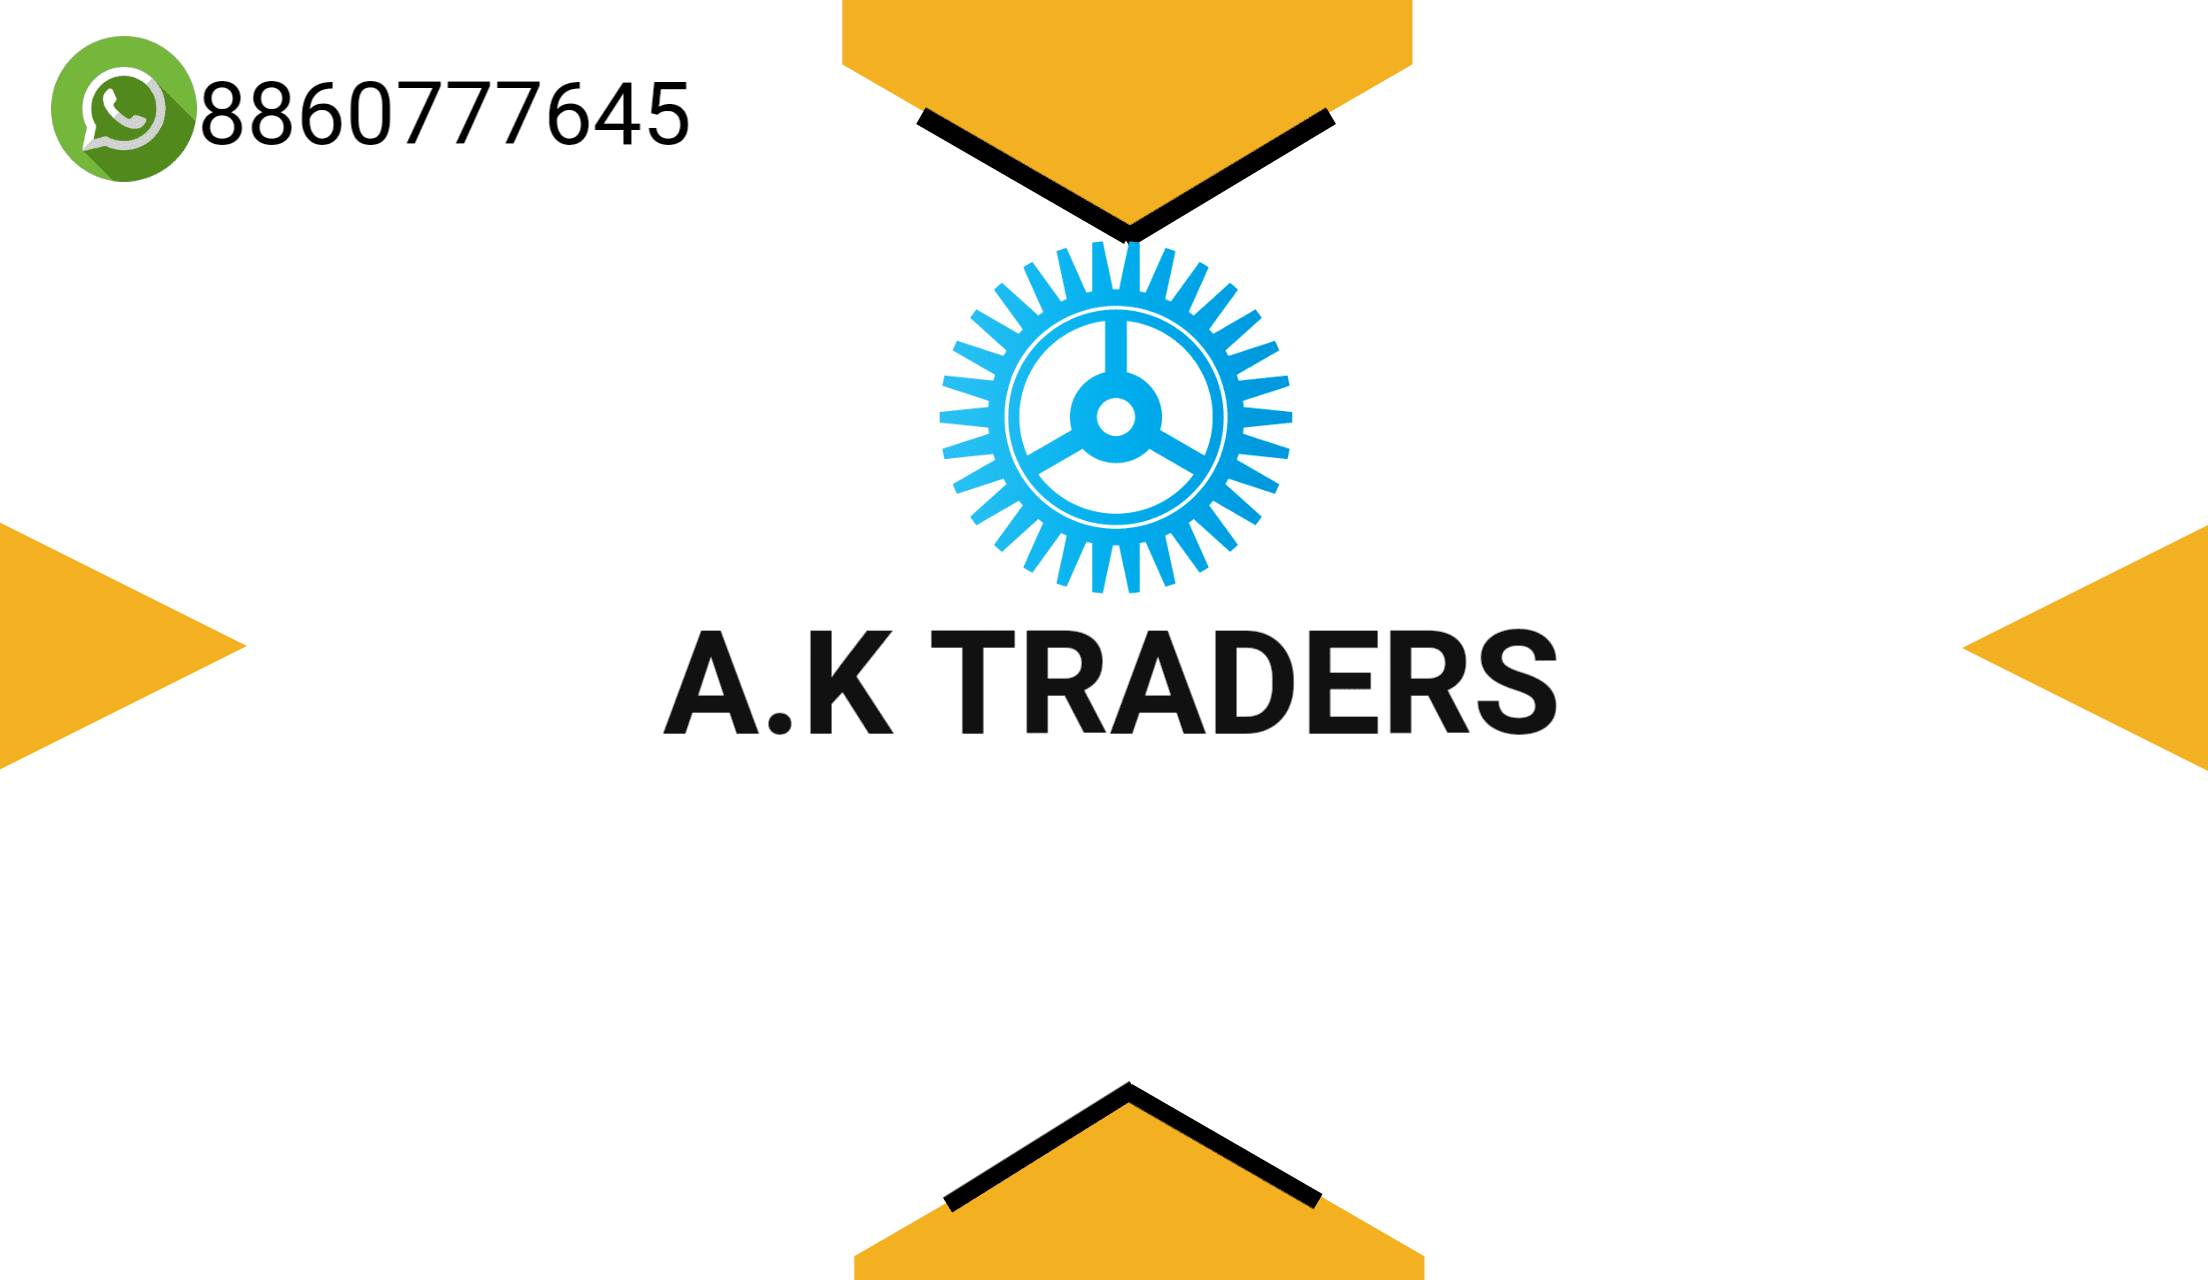 A.K TRADERS